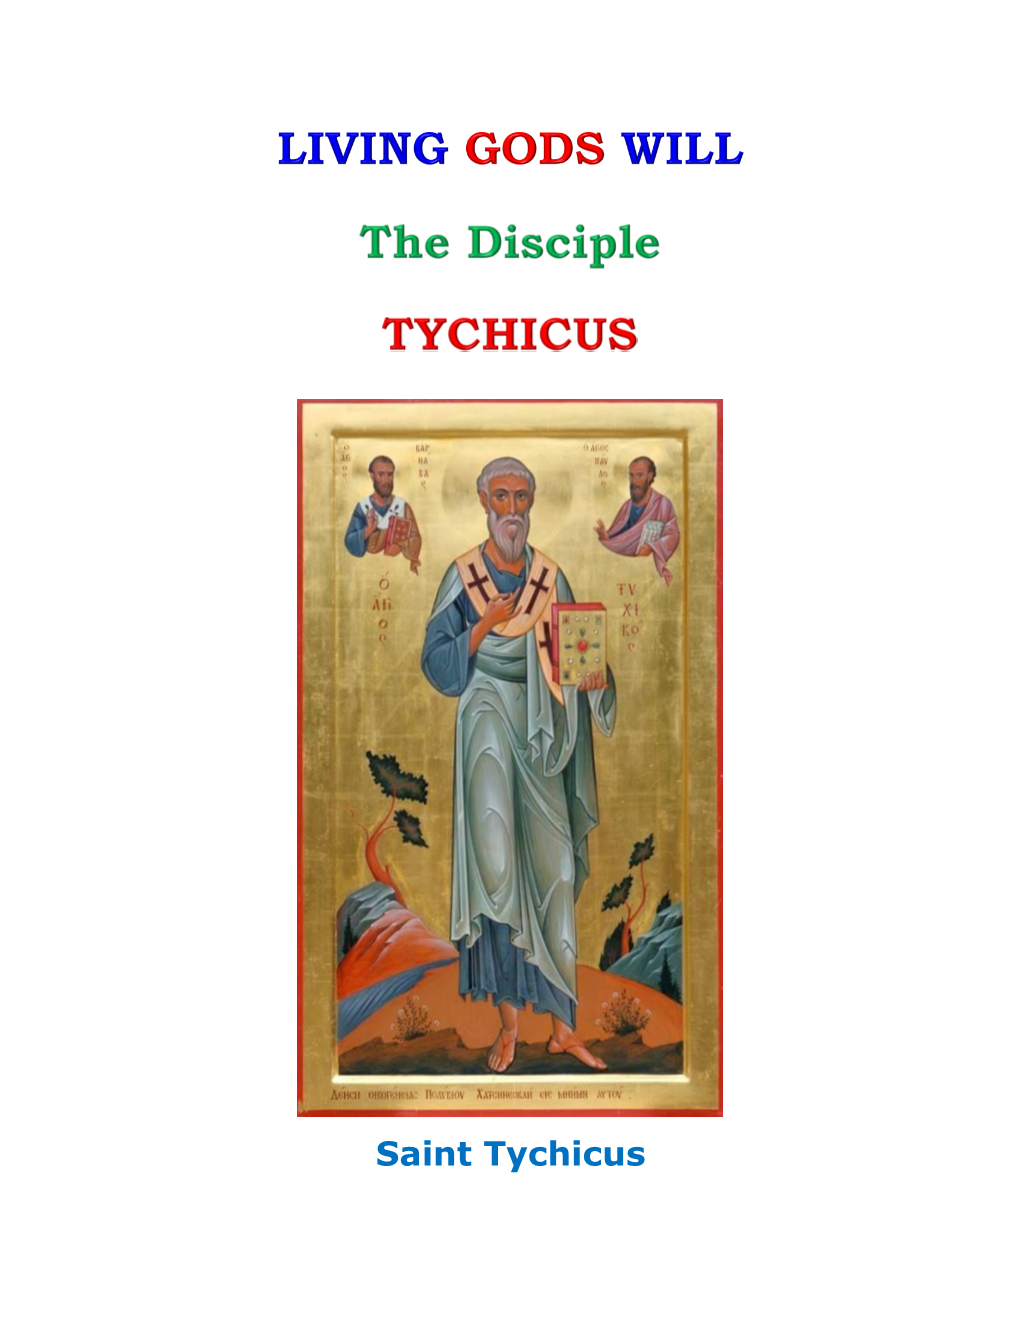 Saint Tychicus the Disciple TYCHICUS Page 1